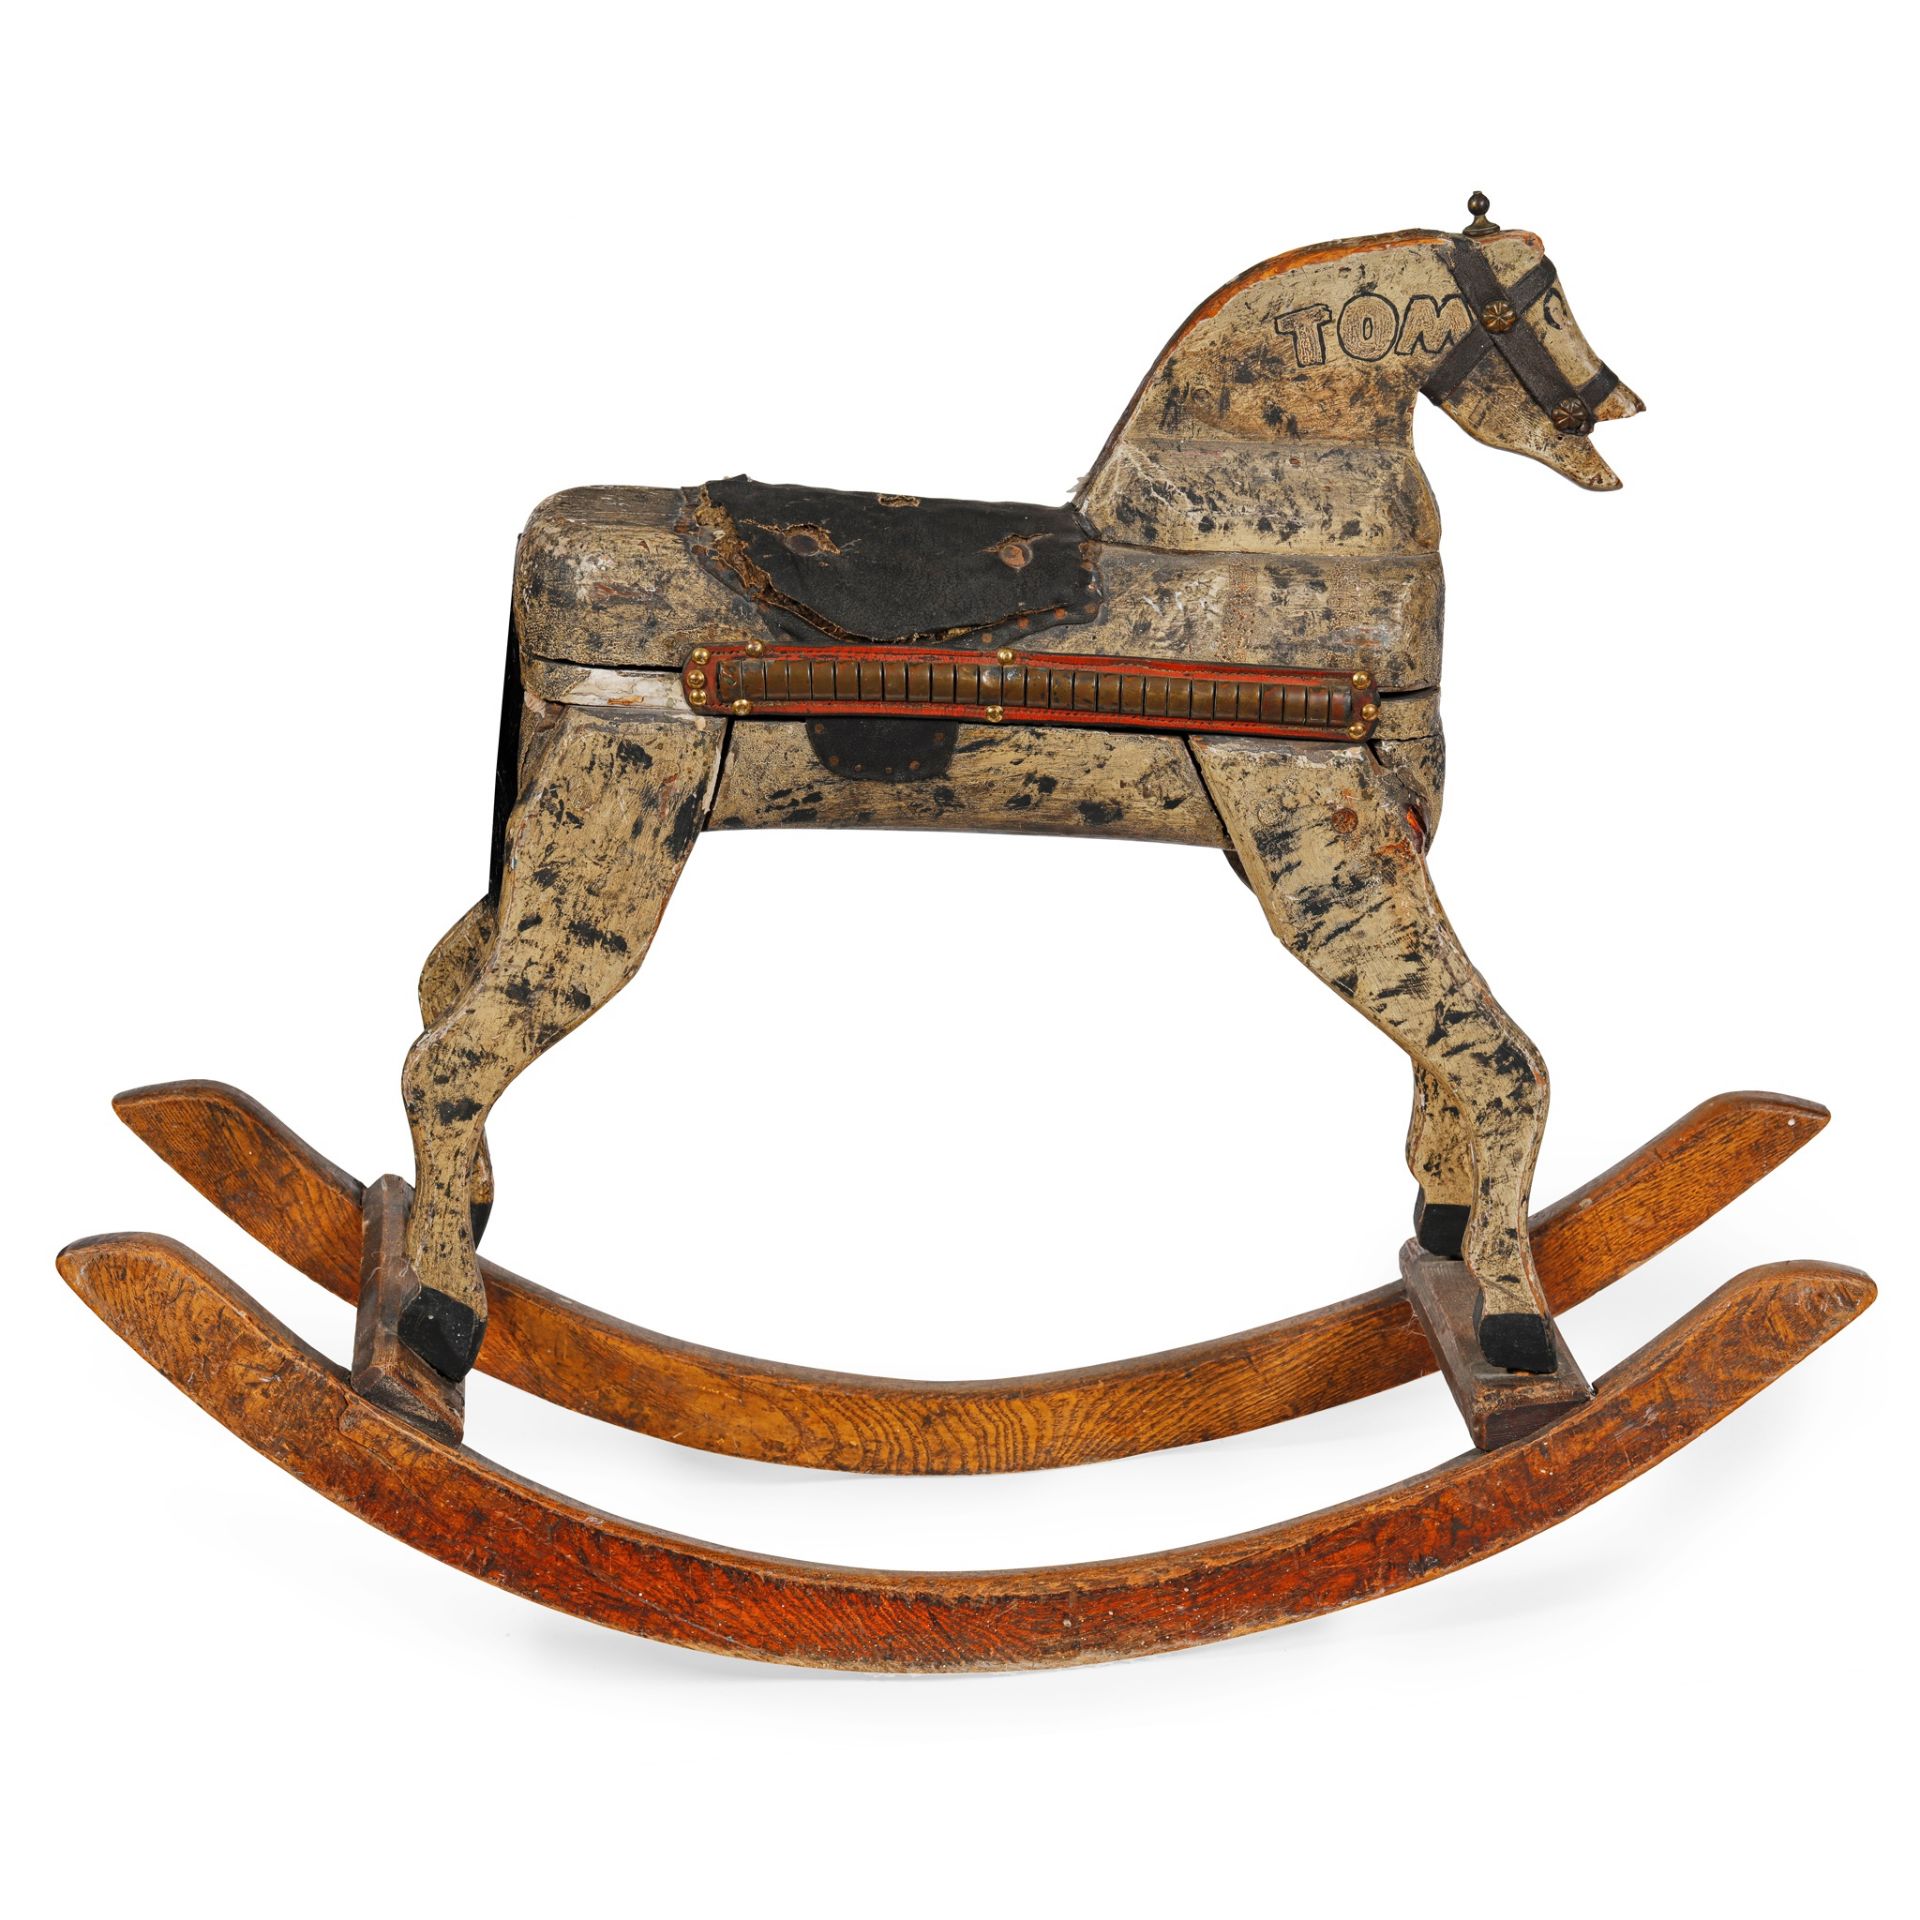 PRIMITIVE PAINTED ROCKING HORSE EARLY 20TH CENTURY